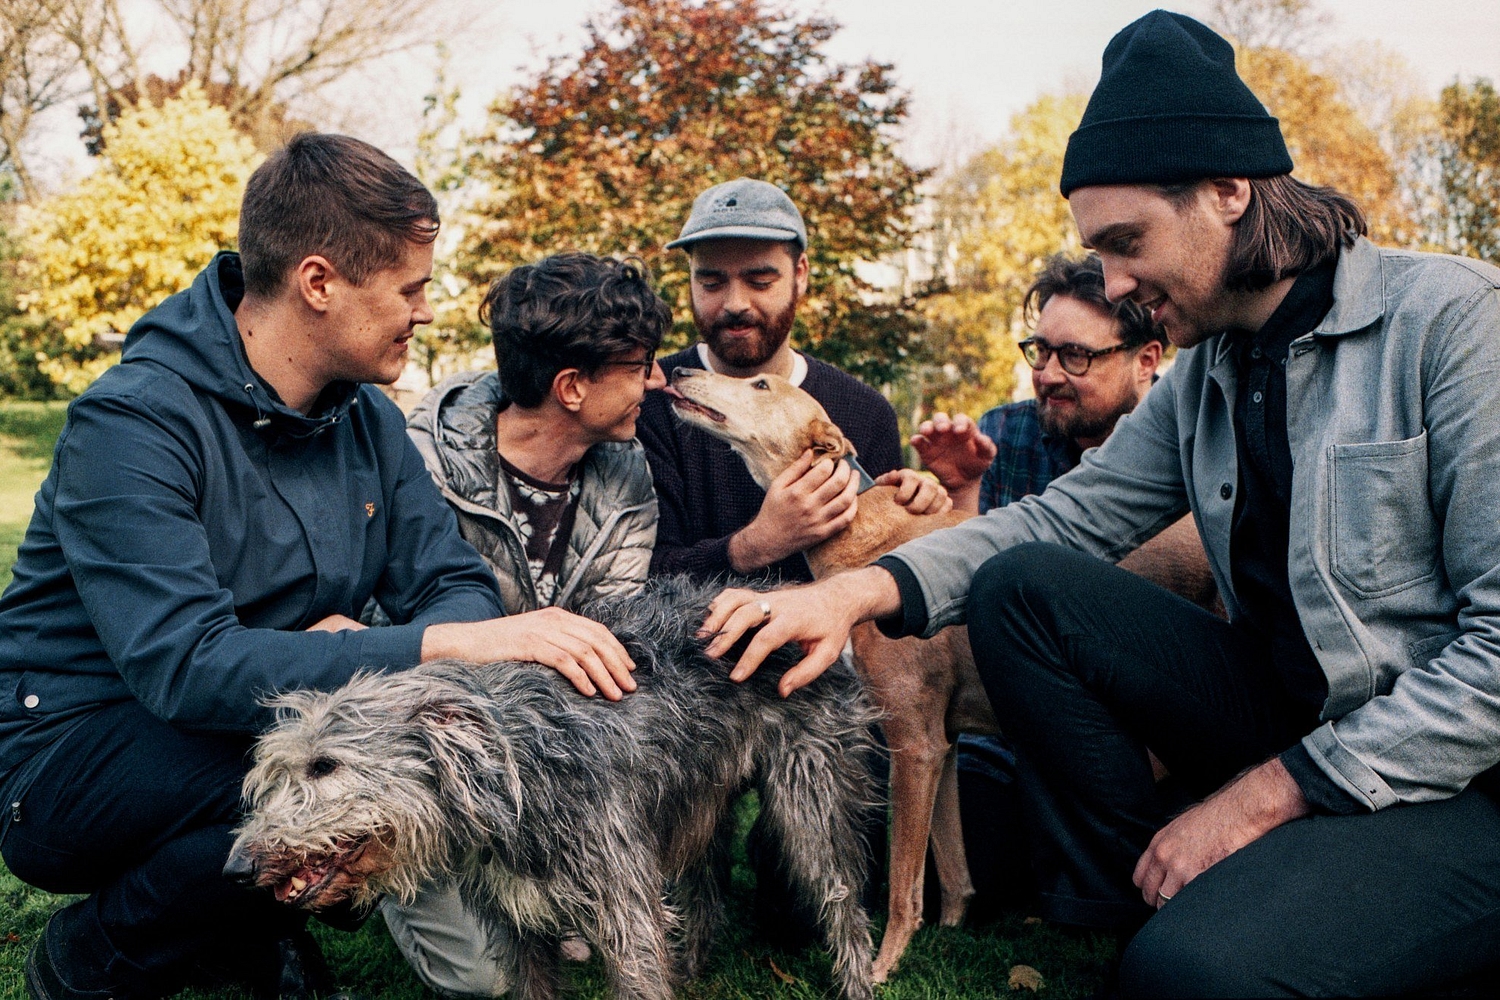 Hookworms announce ‘Microshift Remixes EP’ and new UK/EU shows